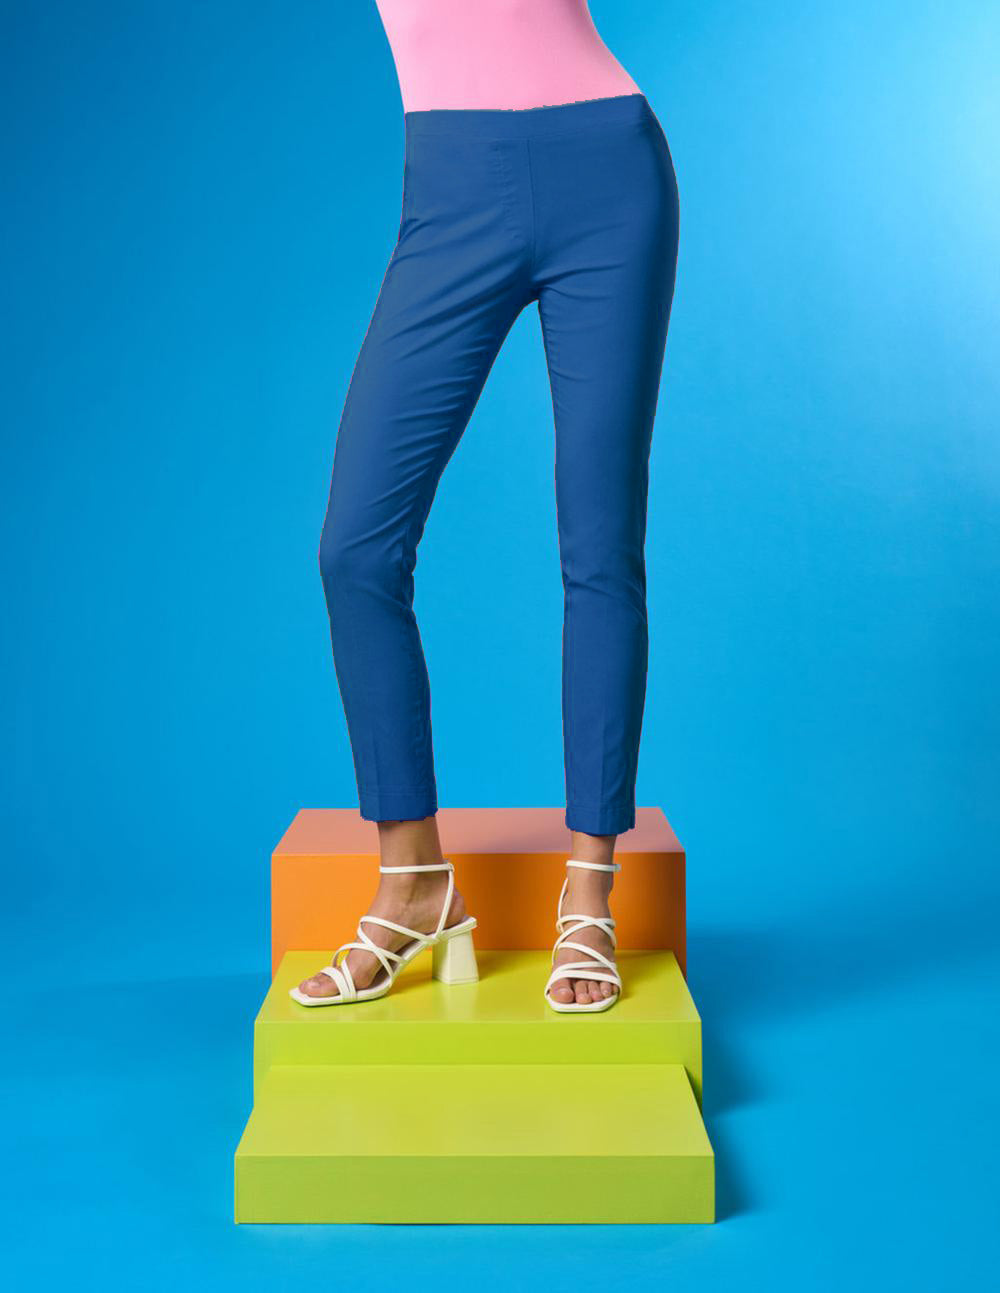 SiSi Joy Leggings - Navy Blue Summer weight stretch ankle grazer trouser leggings (treggings) with side slits on the cuff and faux back pockets with buttons and faux front pockets with diamanté studs.